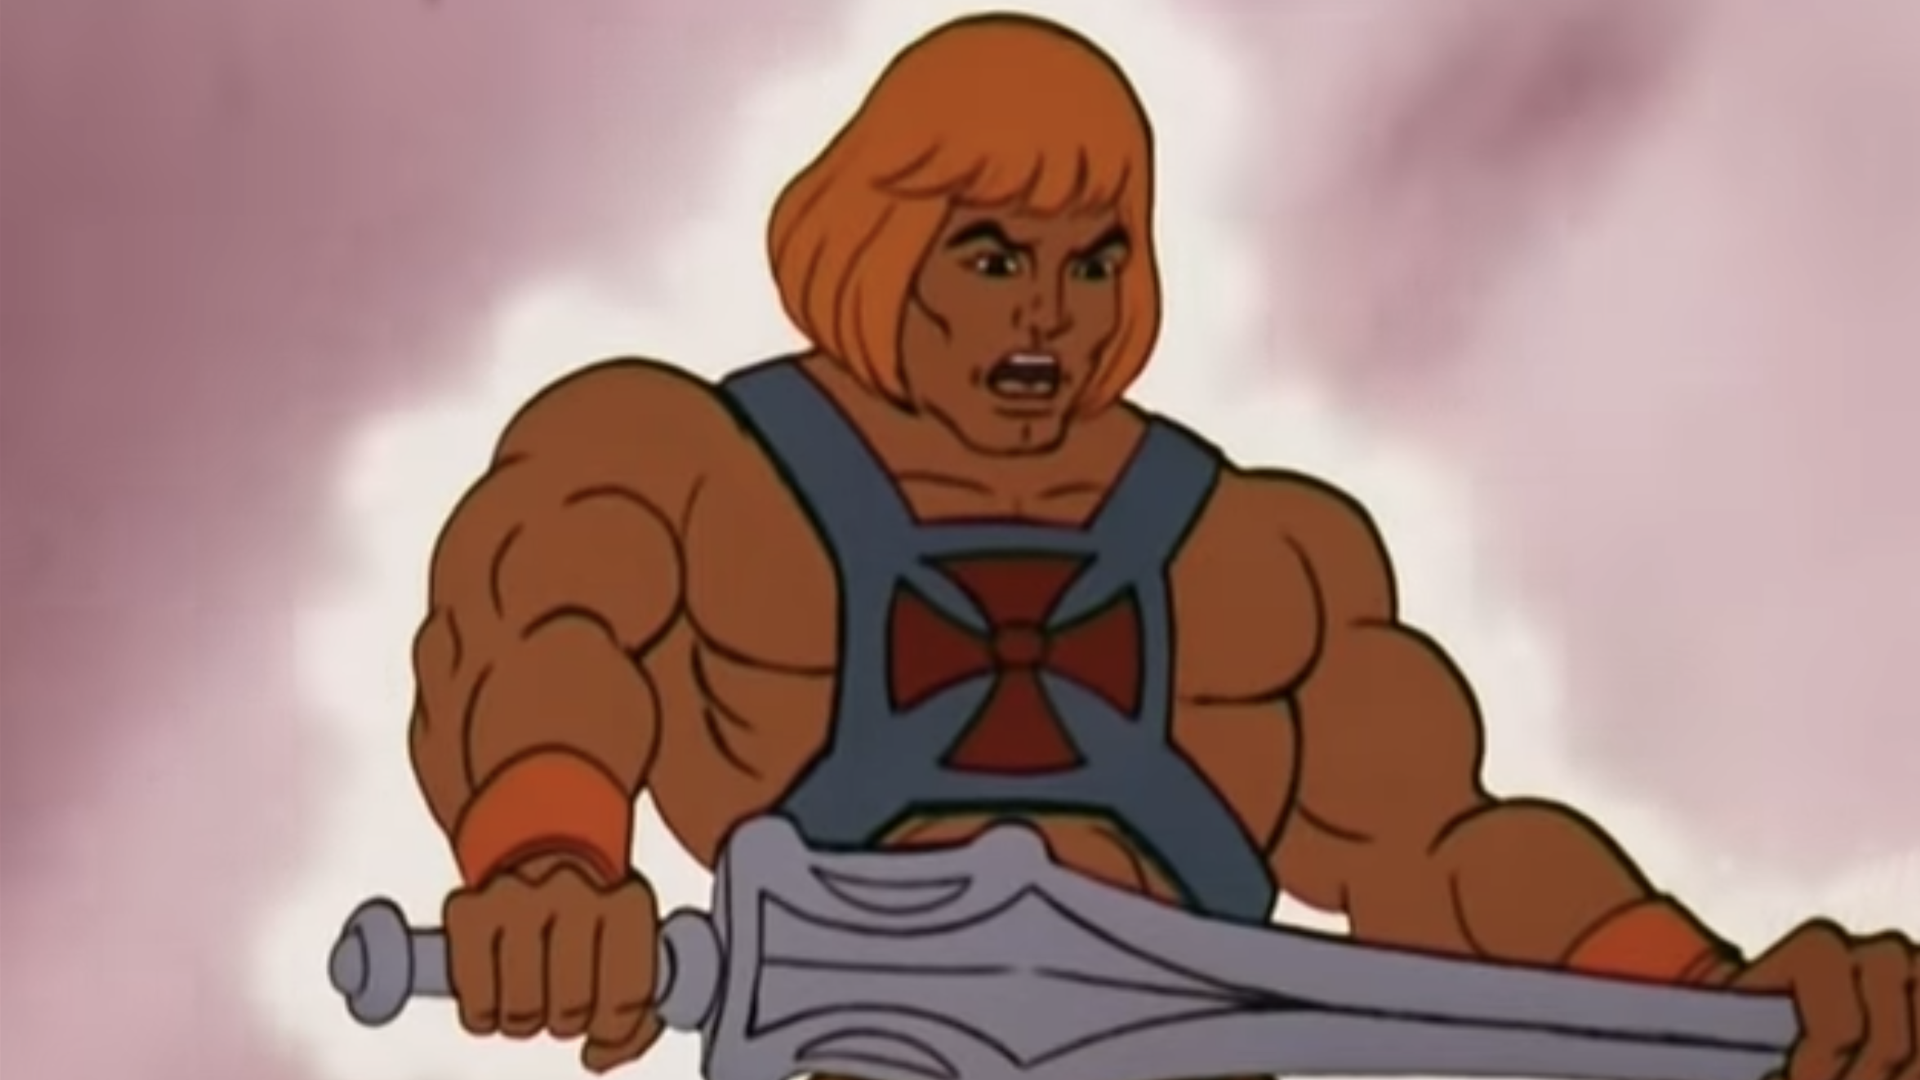 He-Man television show